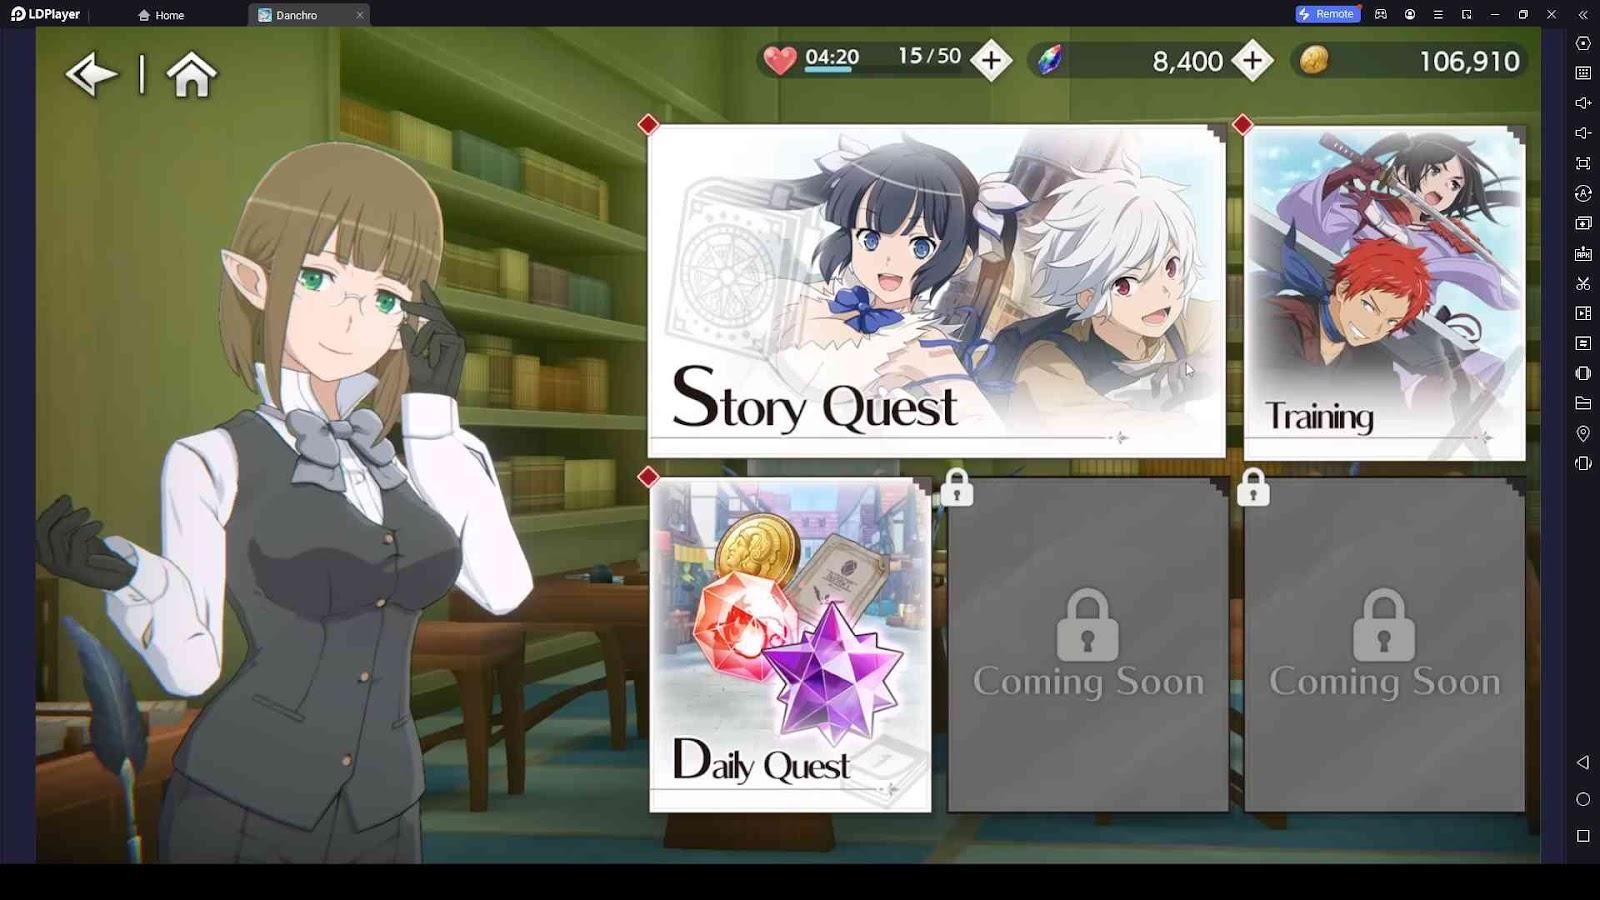 Story Quests, Daily Quests, and Training